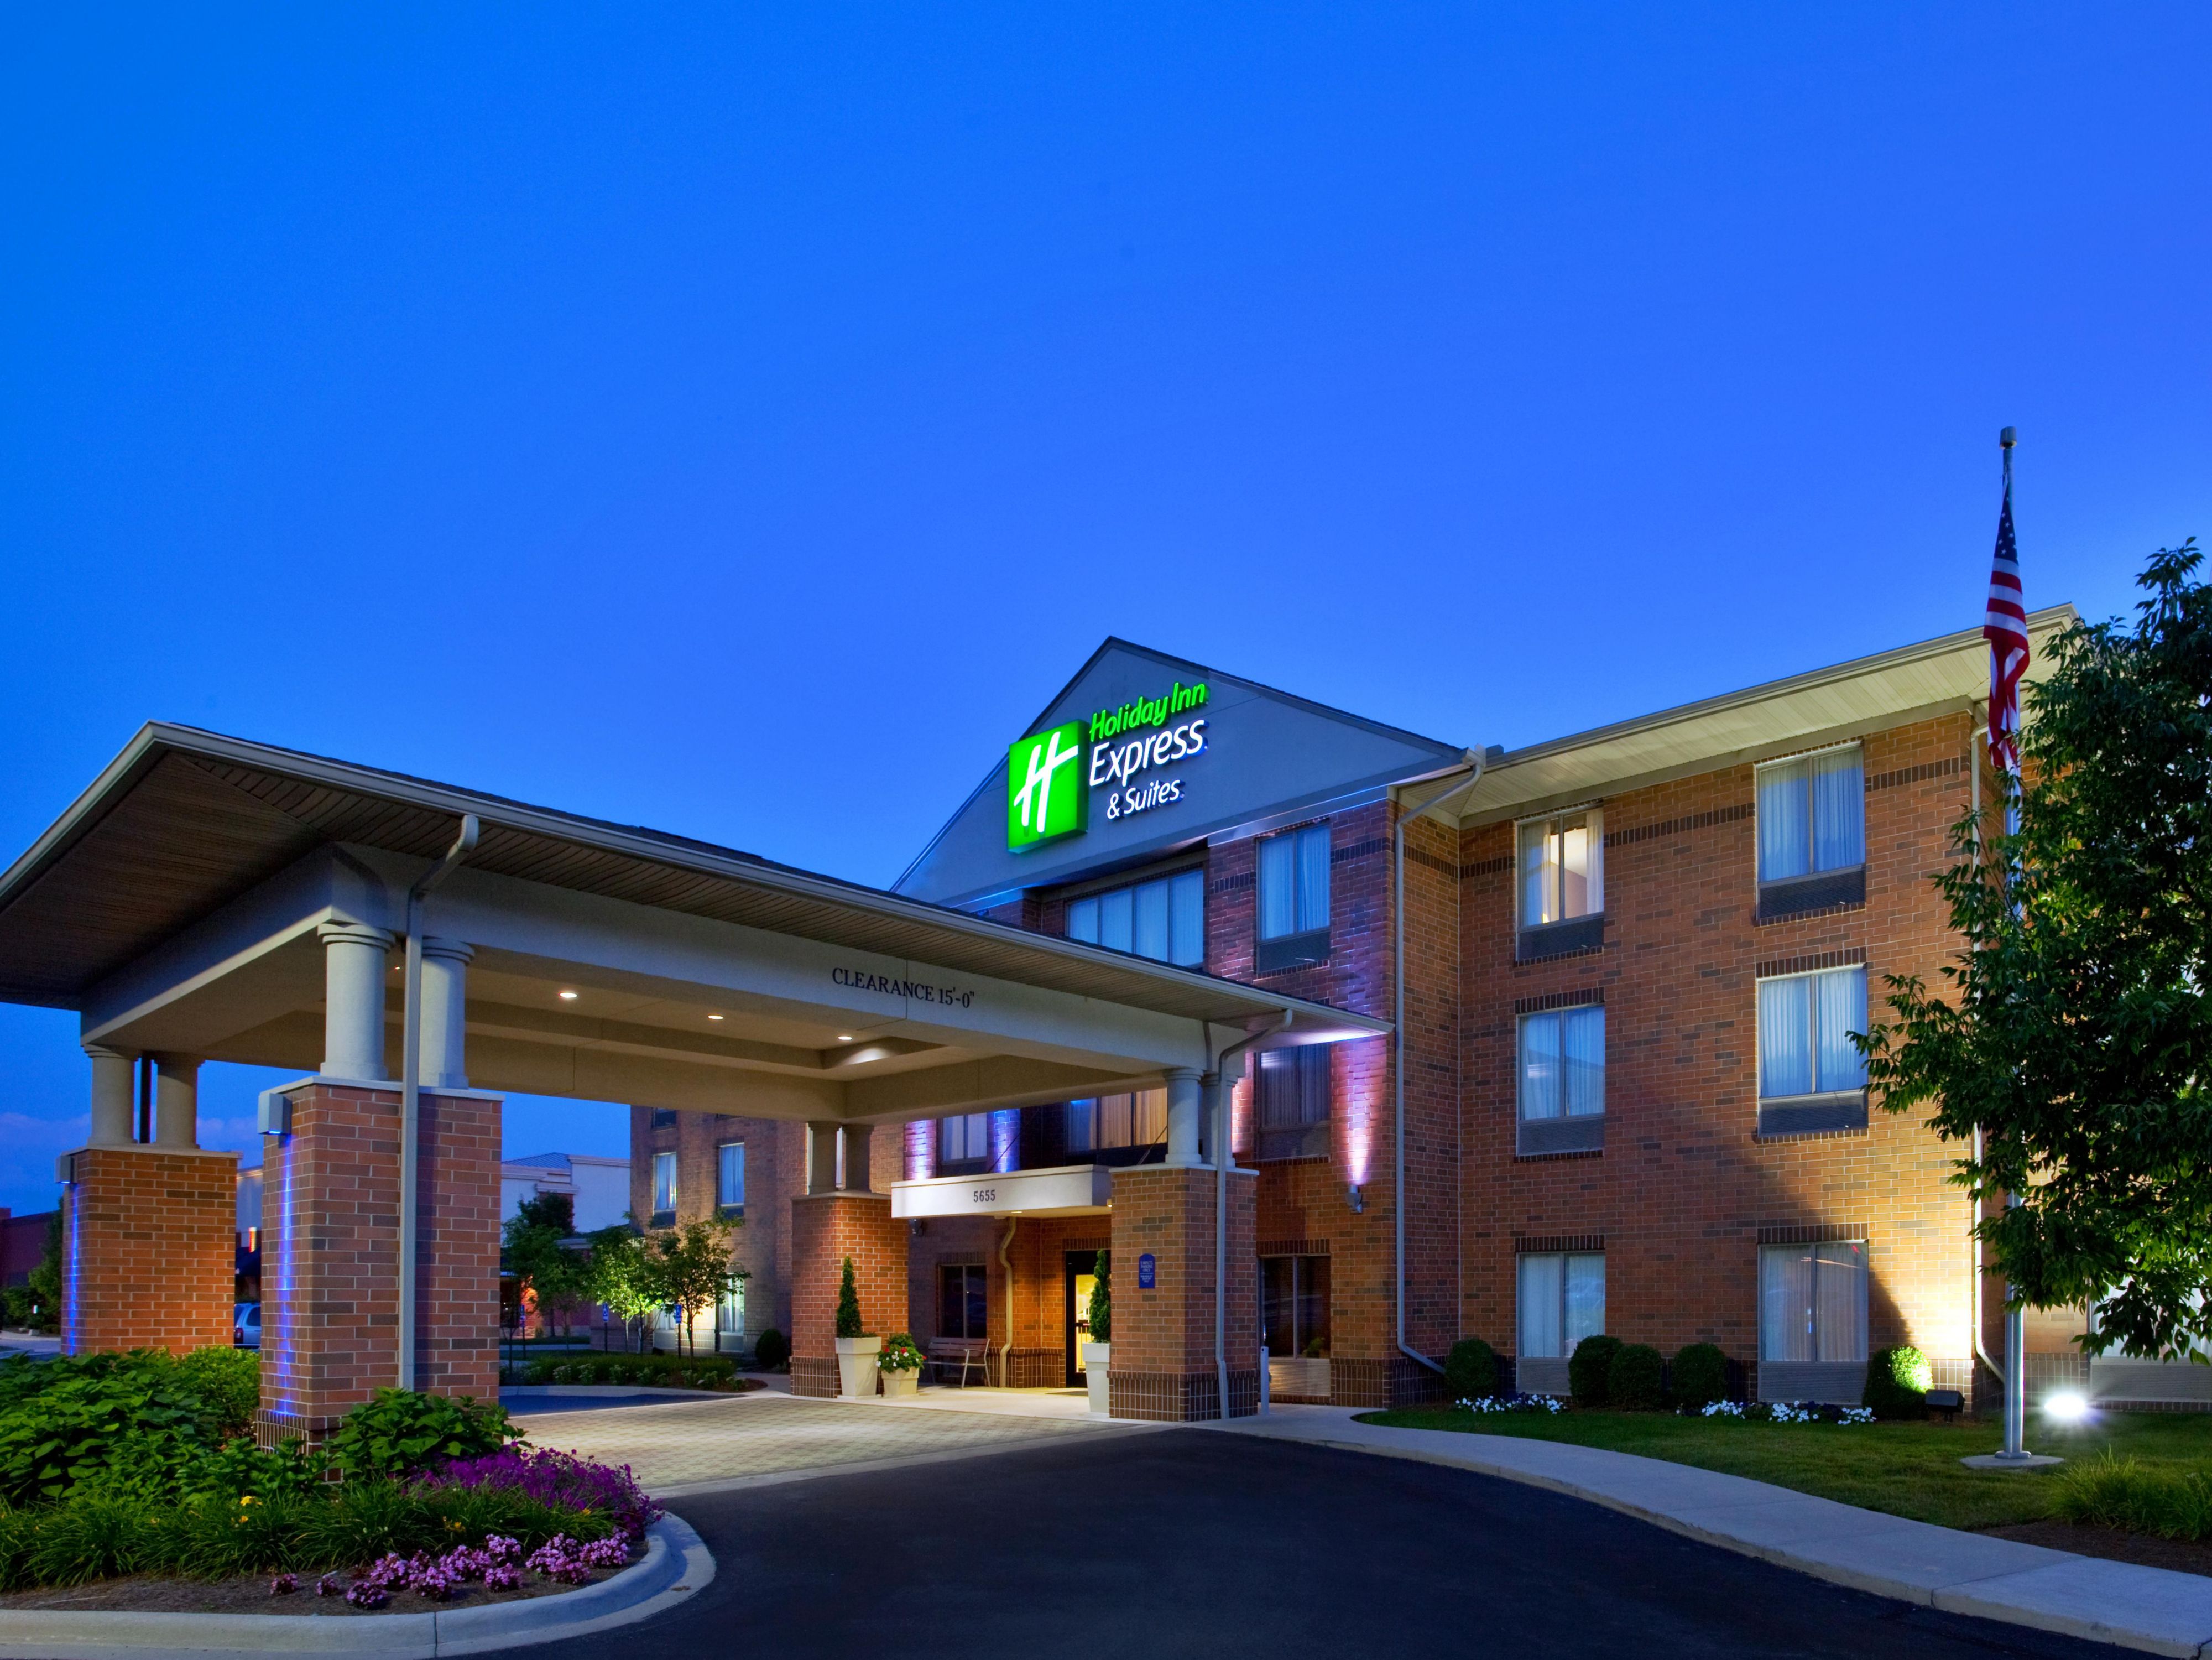 The three properties refinanced are all located in Ohio and consist ofa Springhill Suites by Marriott Holiday Inn and Hol